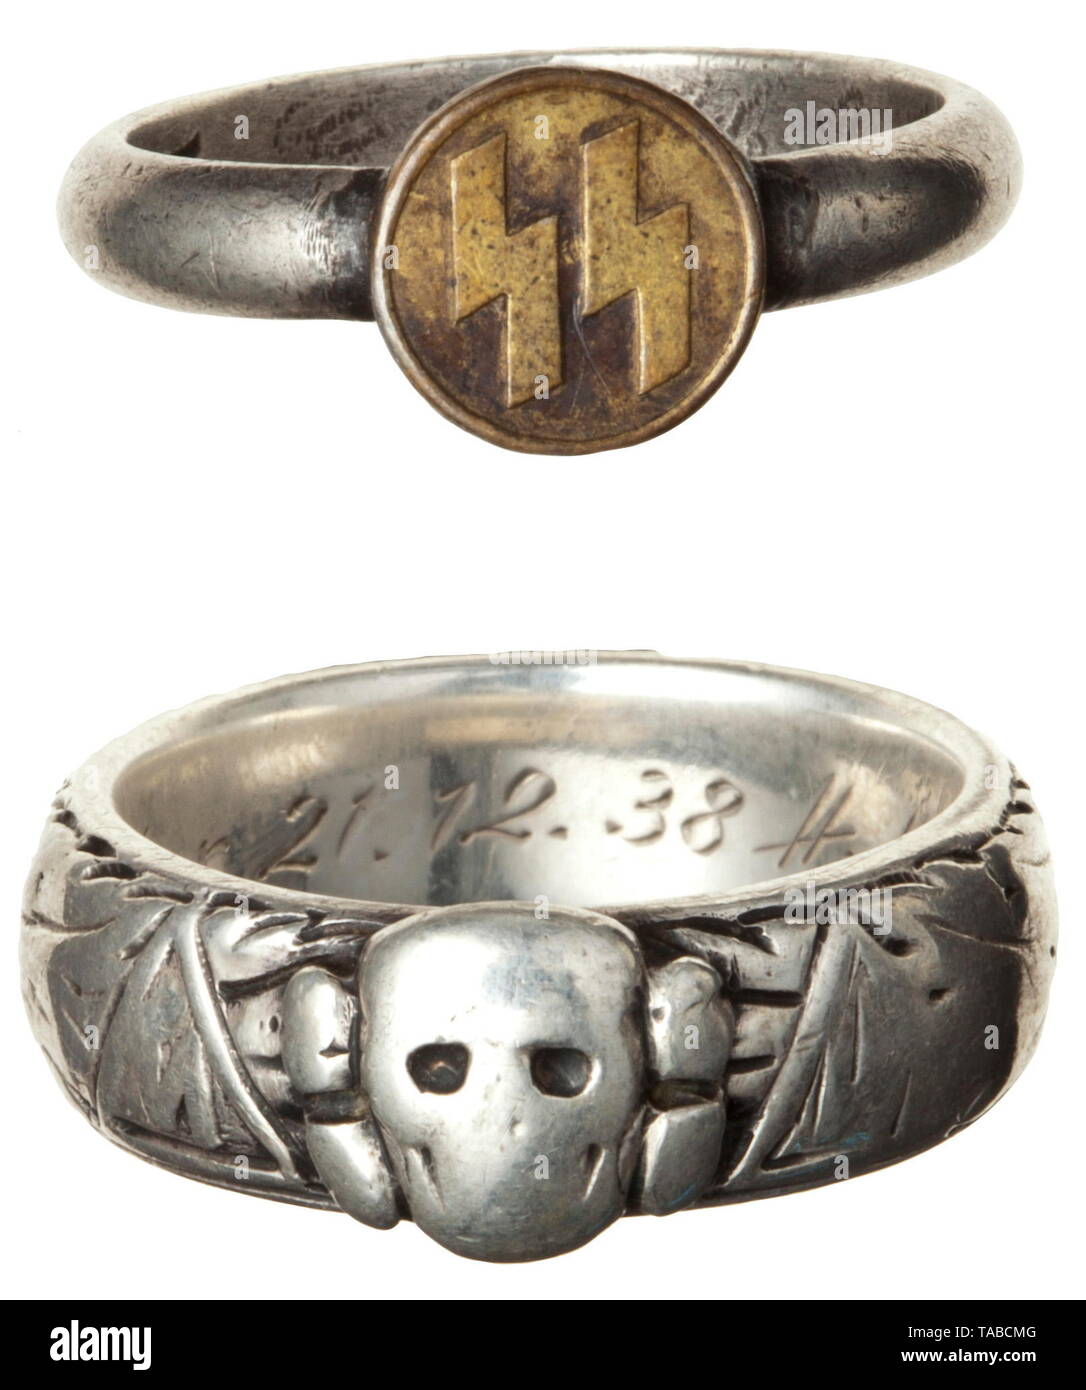 SS-Sturmbannführer Hans Elkar - an SS death's head ring Heavily used ring with inside engraving 'S.lb. Elkar 21.12.38 H.Himmler'. The band (small sized) is soldered underneath the applied death's head. Inside diameter 18.2 mm. Weight 9.5 g. Included is a private memento ring for SS members of '835' silver with applied, round blackened platelet and SS runes, the inside with engraved initials and date '16.1.1944'. Same ring size. Also included are seven books (tr. 'The German Peasant's 1000-year Struggle', 'The Path of Our People', 'Odal' etc.) dedicated 20th century, Editorial-Use-Only Stock Photo